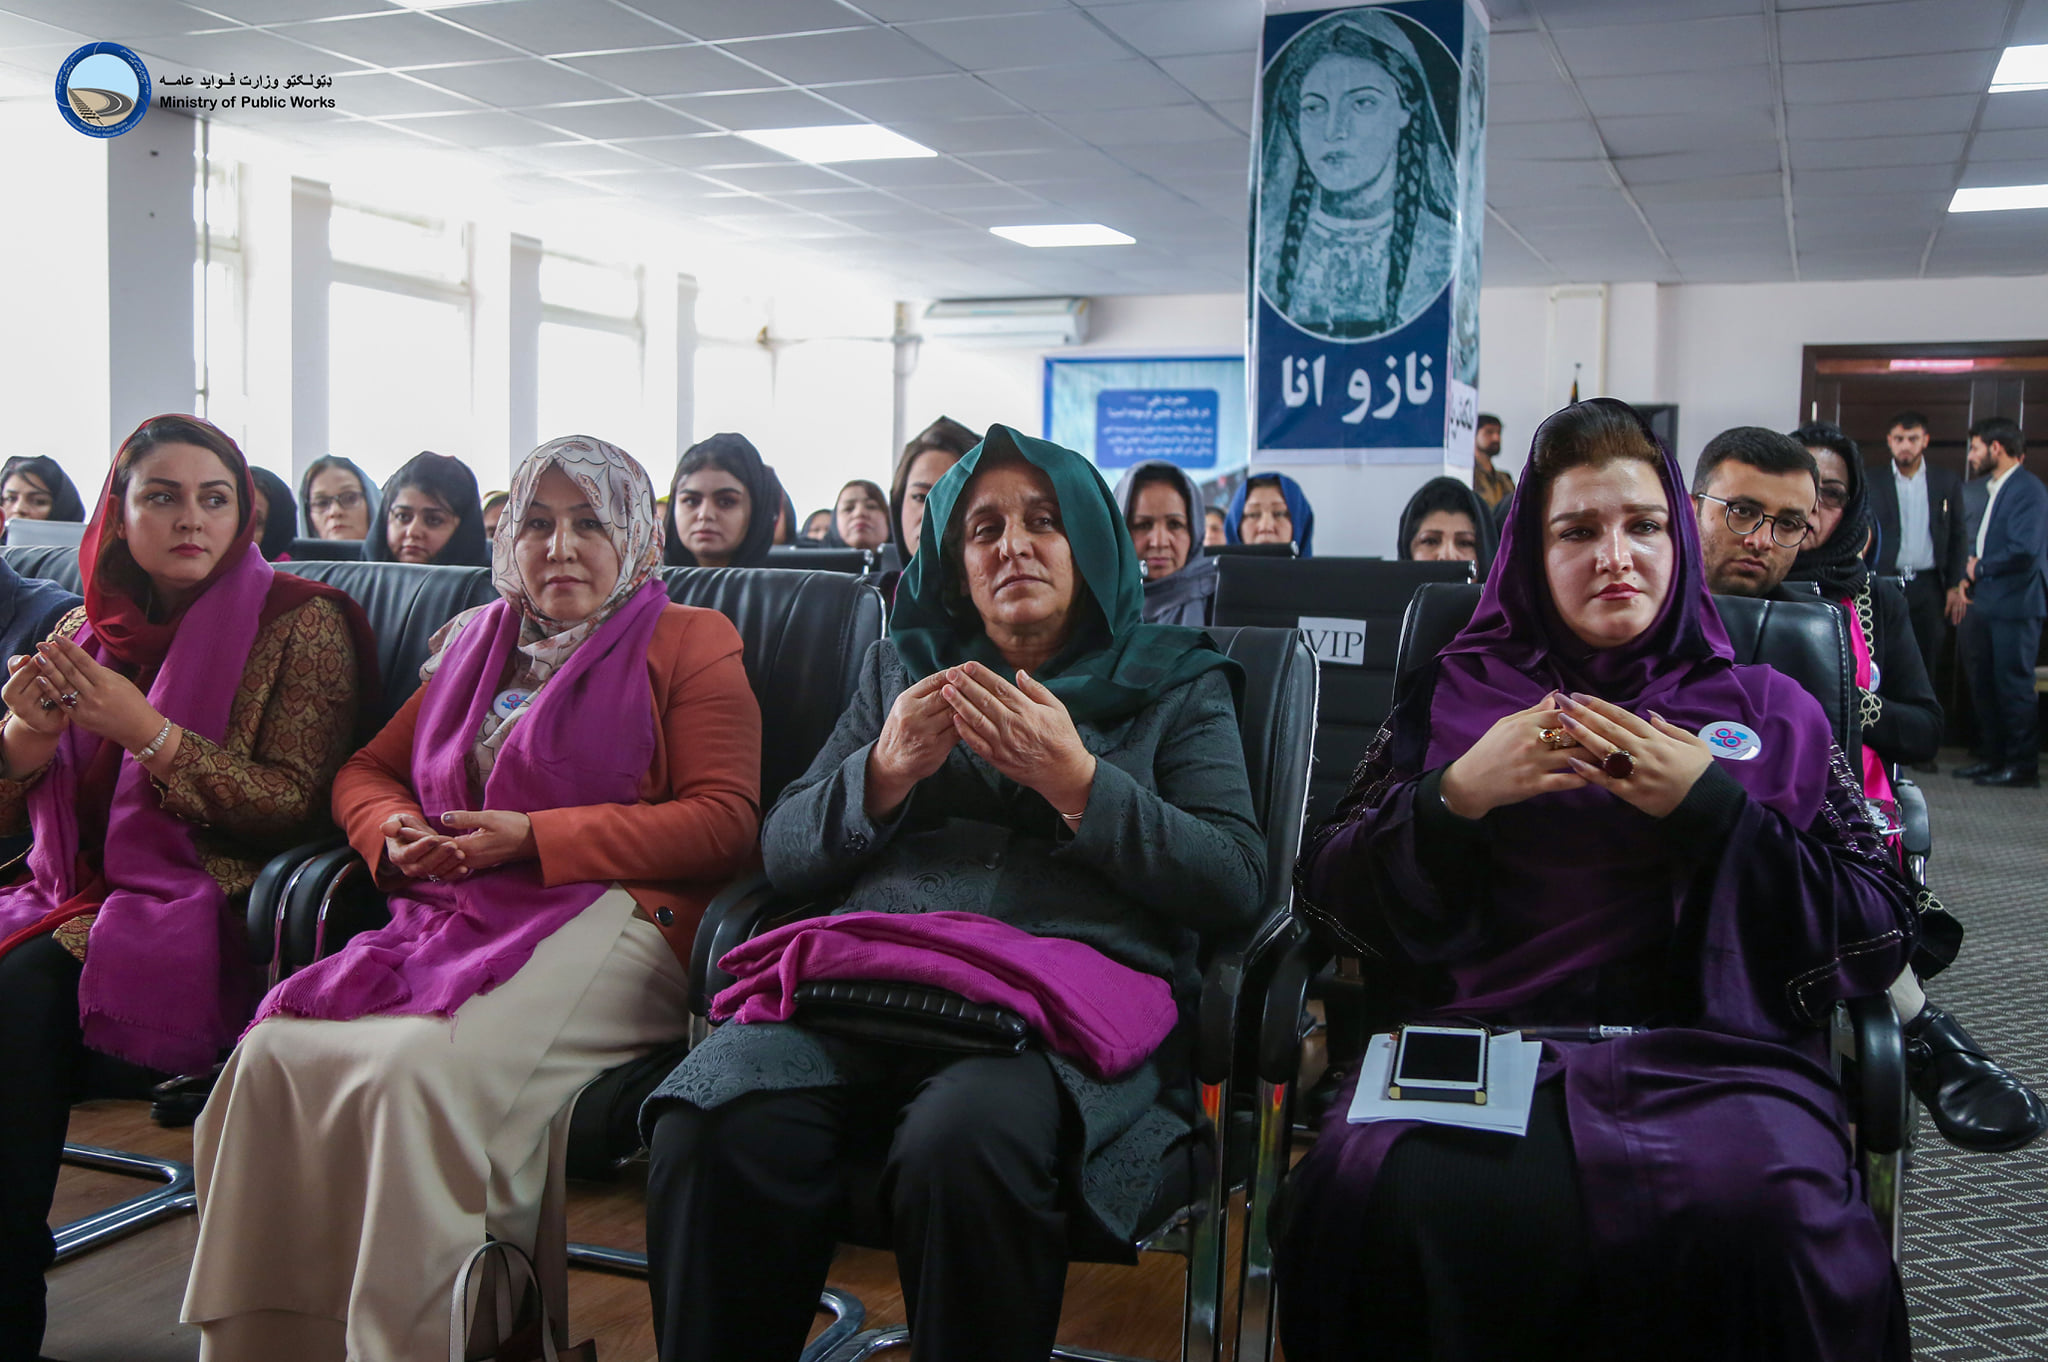 International Women's Day Celebrated at the Ministry of Public Works